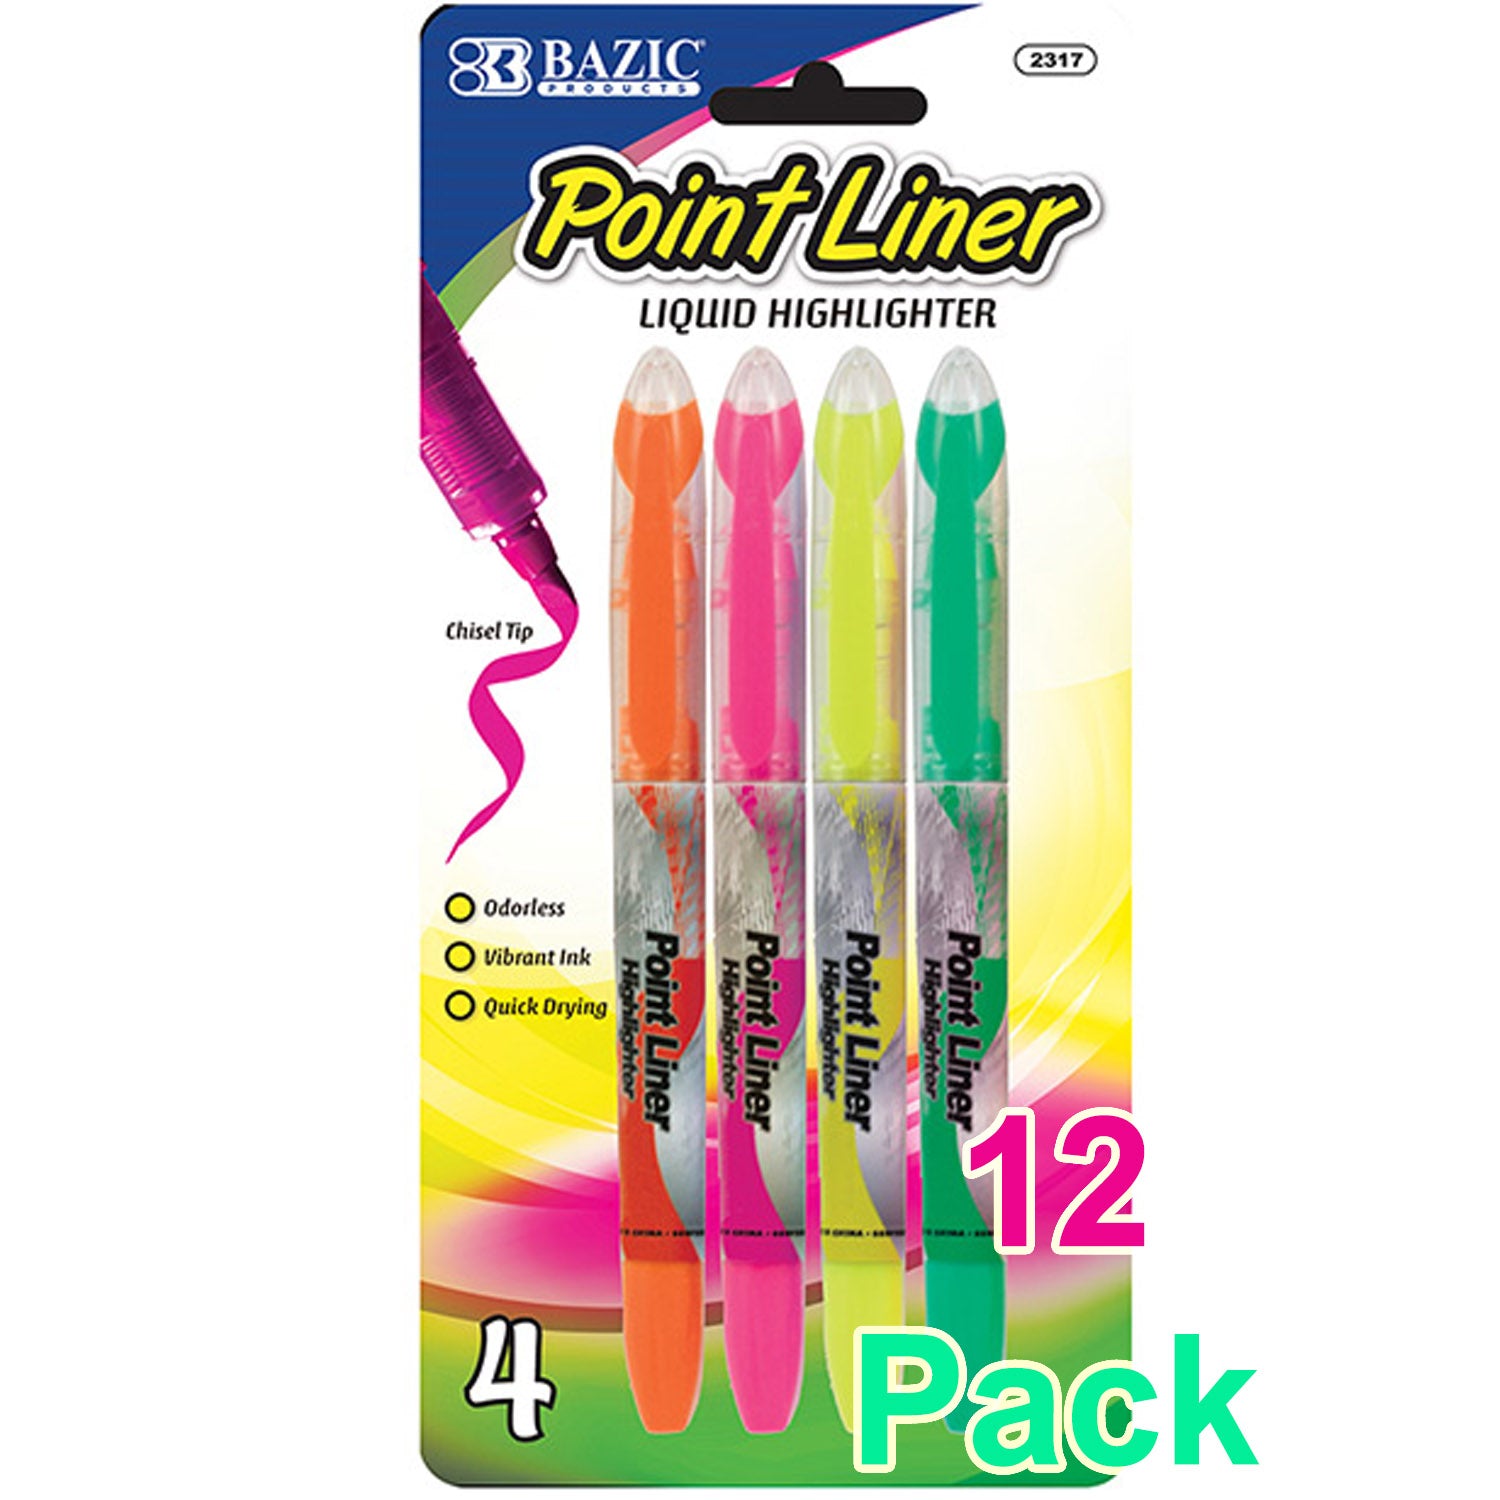 Assorted Colors Pen Style Neon Color Liquid Highlighters (4/Pack)